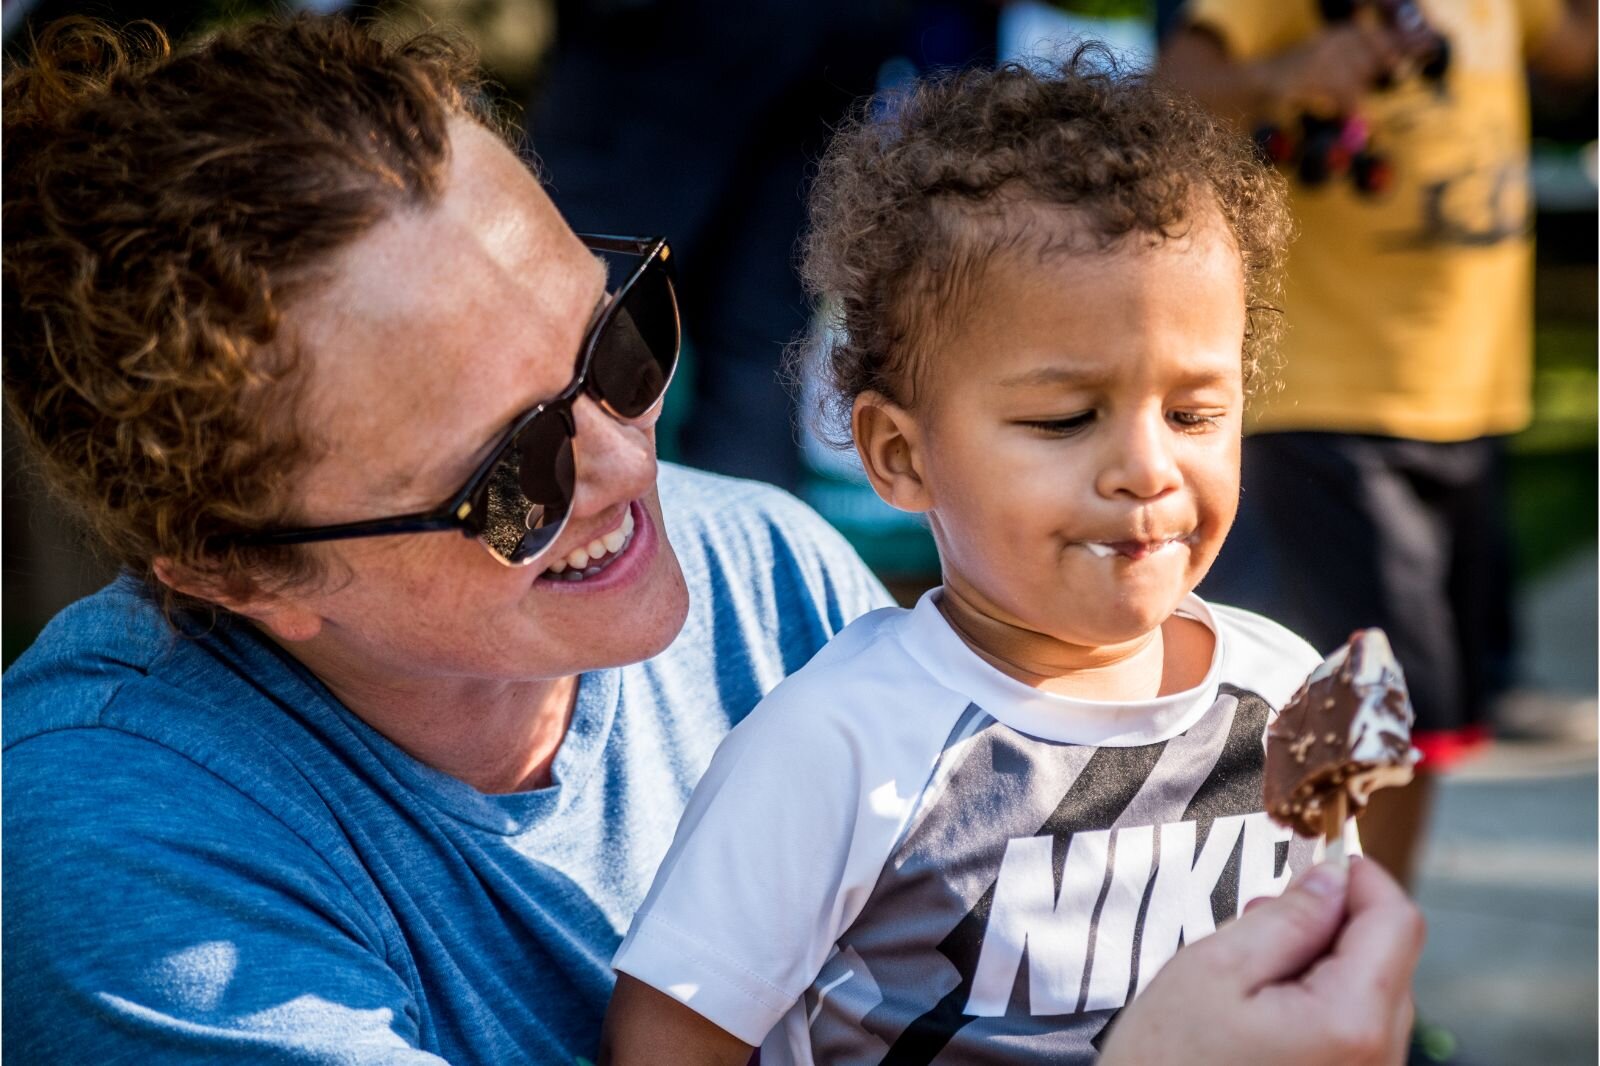 Ice cream makes everything better at the Naitonal Night Out celebration in the Vine Neighborhood. Photo by Fran Dwight.